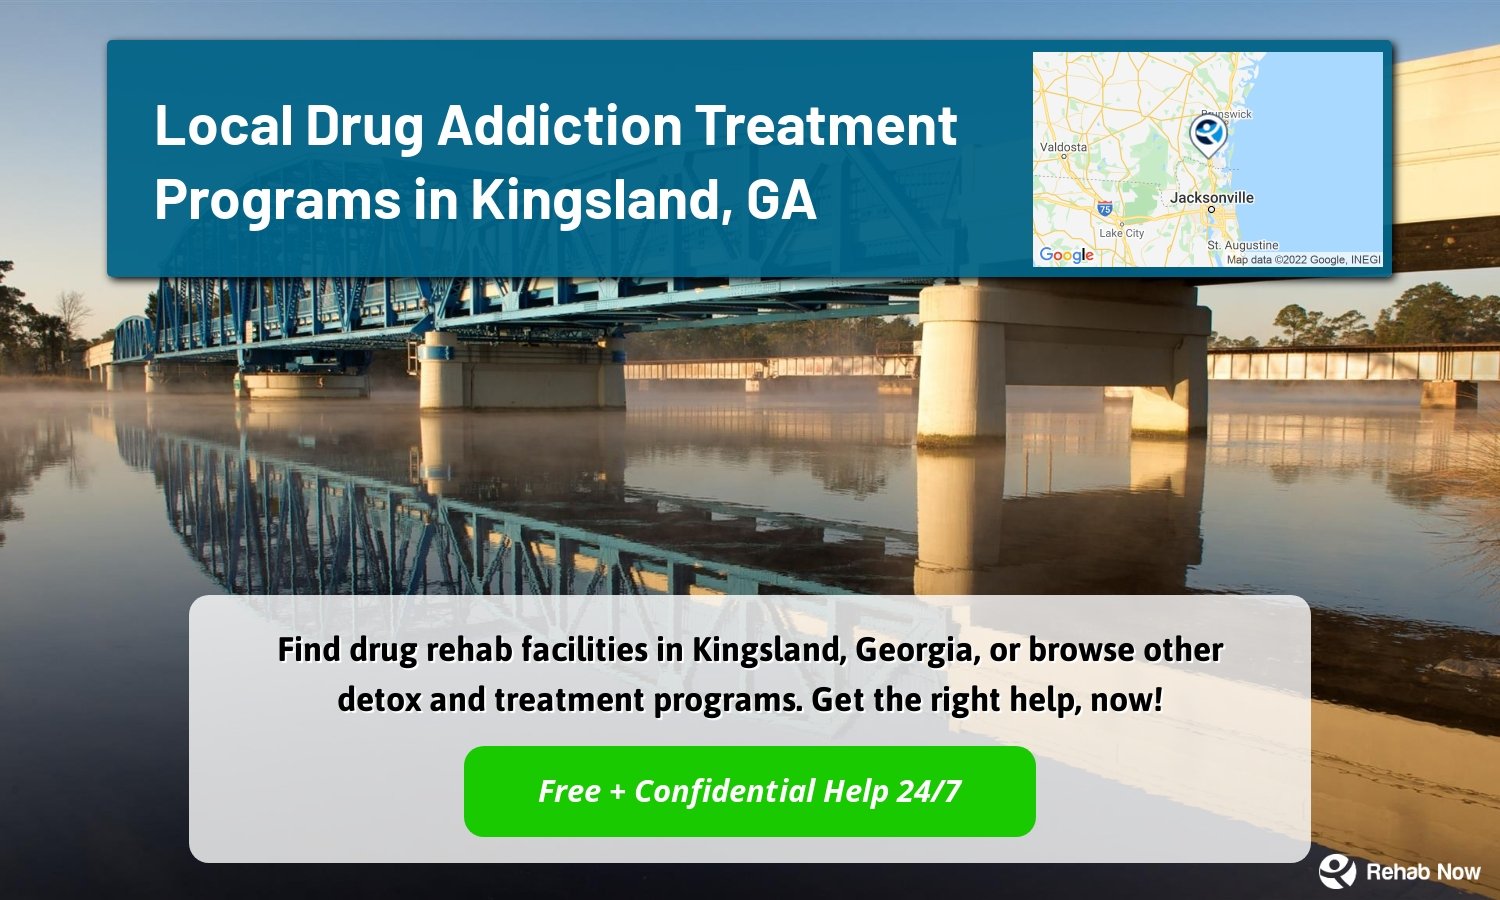 Find drug rehab facilities in Kingsland, Georgia, or browse other detox and treatment programs. Get the right help, now!